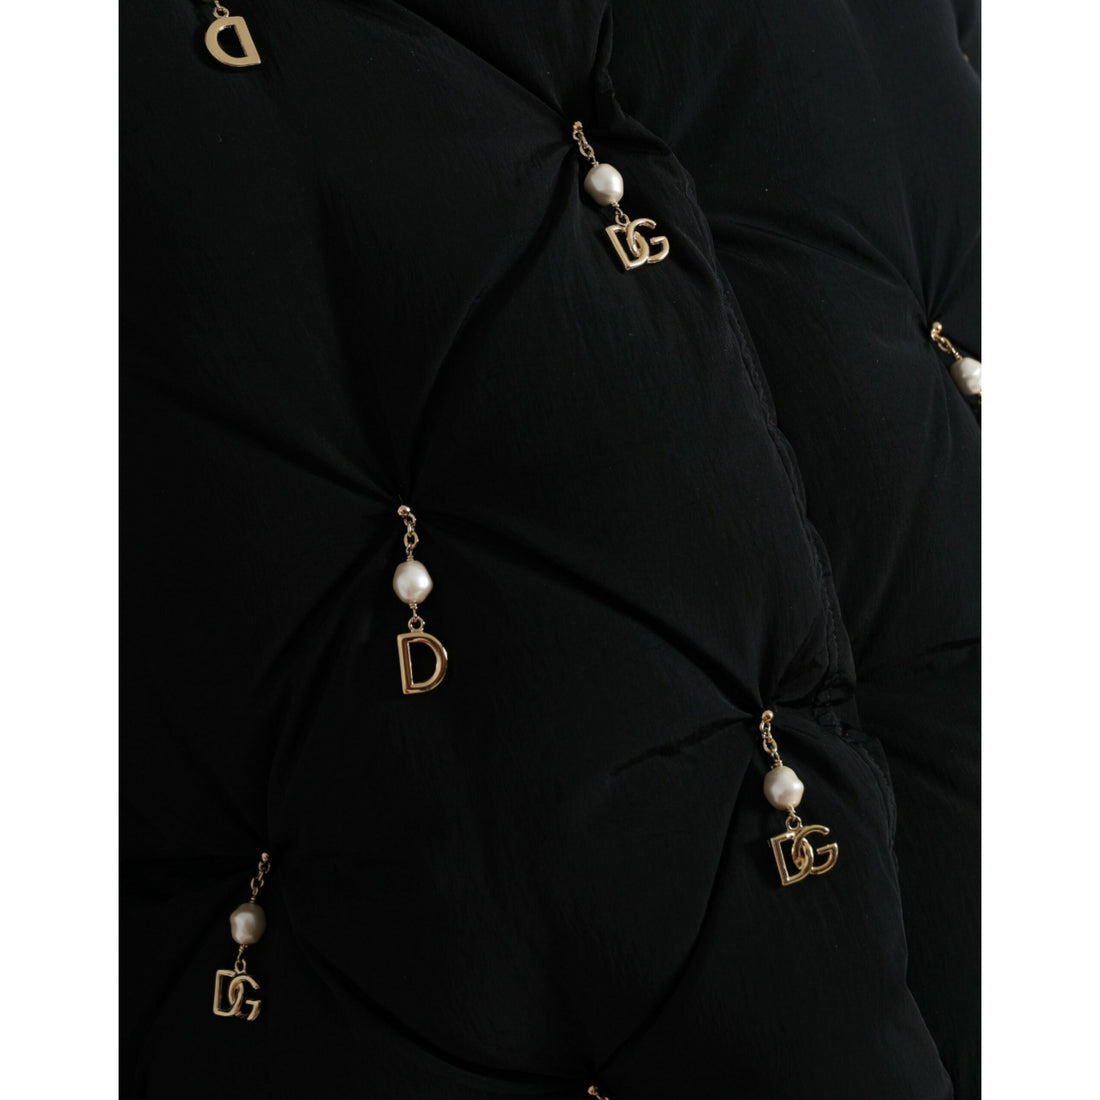 Dolce & Gabbana Elegant Quilted Jacket with Pearl Embellishment